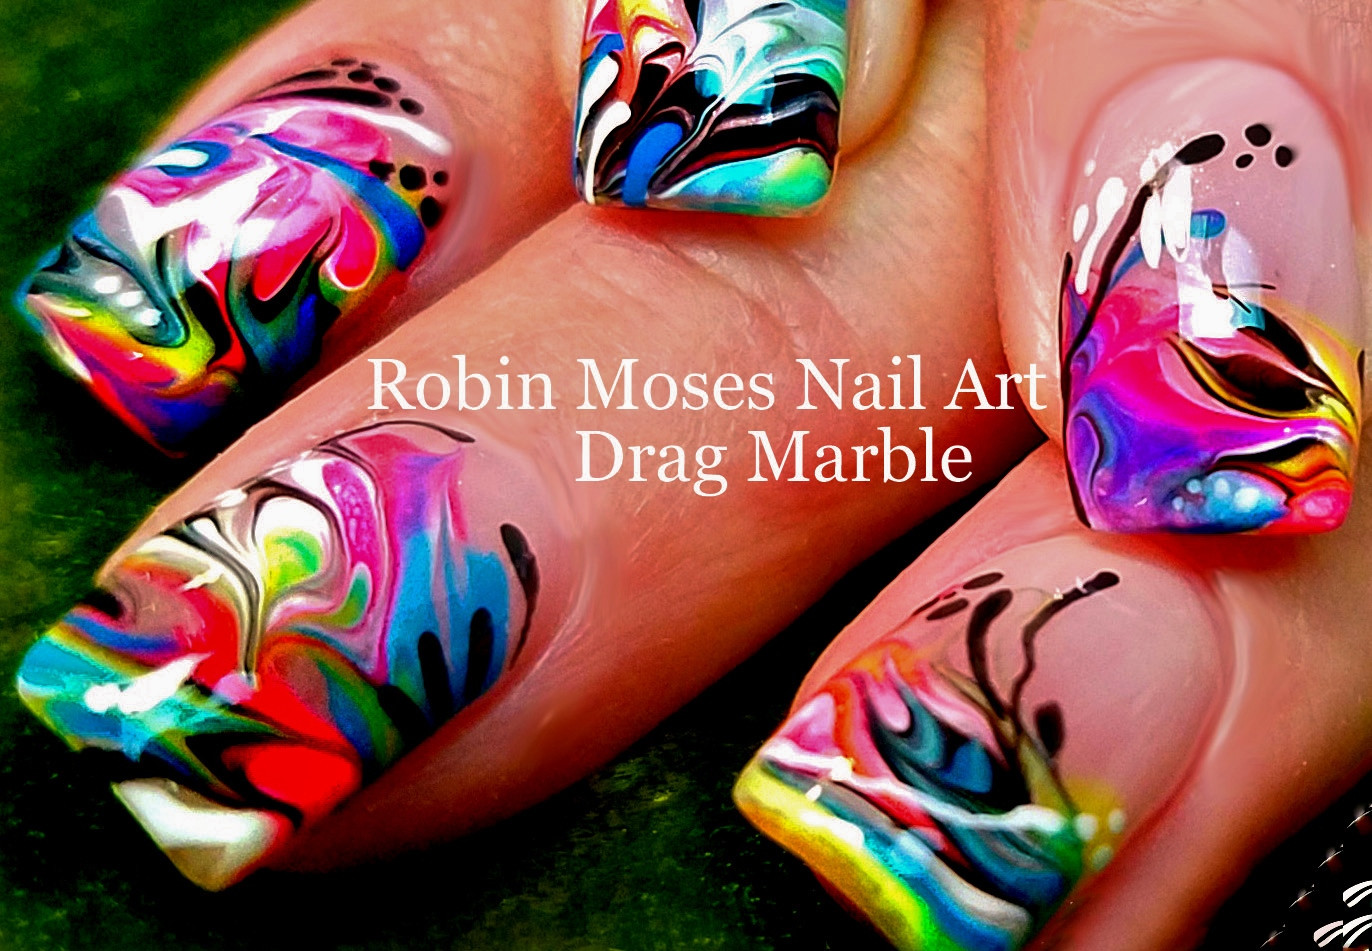 Robin Moses Nail Art Brushes - Yahoo Search Results - wide 8